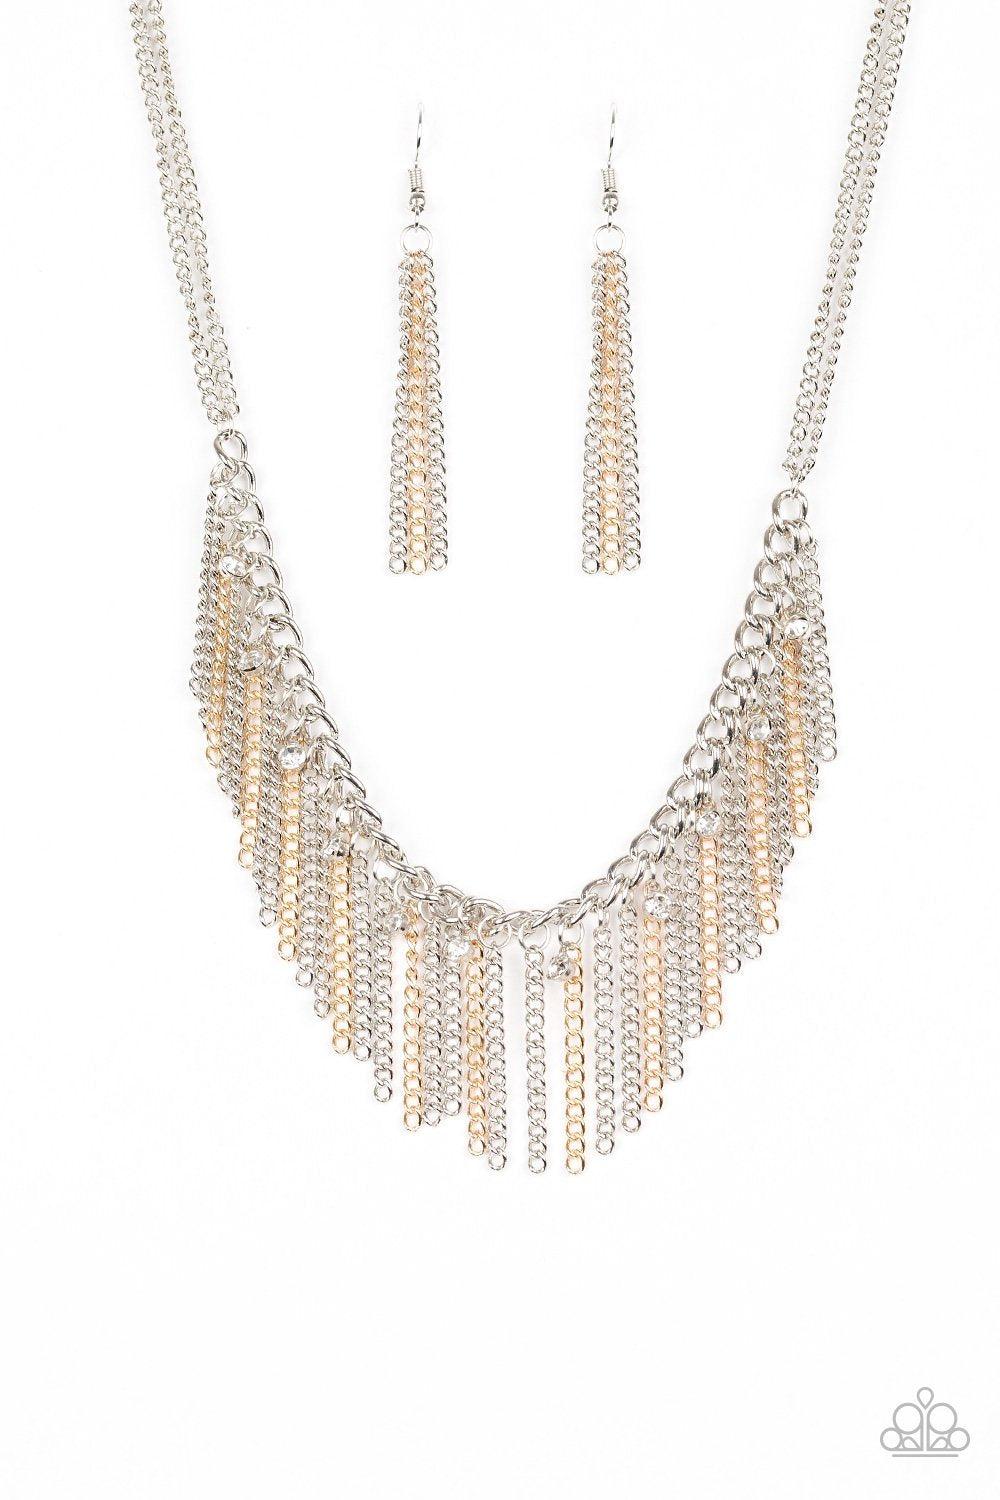 Retro Edge Gold and Silver Necklace - Paparazzi Accessories-CarasShop.com - $5 Jewelry by Cara Jewels